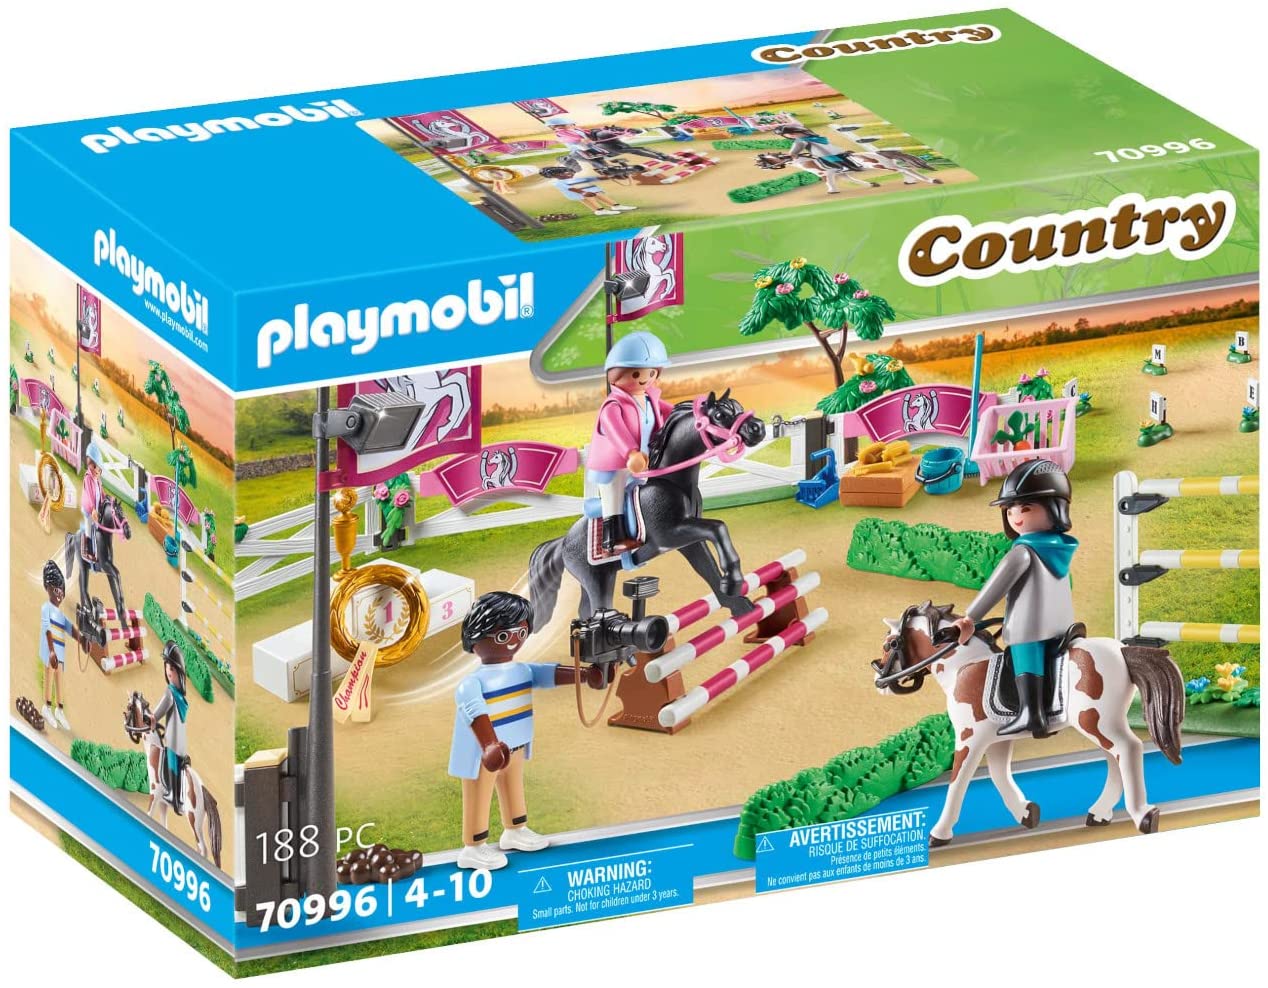  PLAYMOBIL: Country